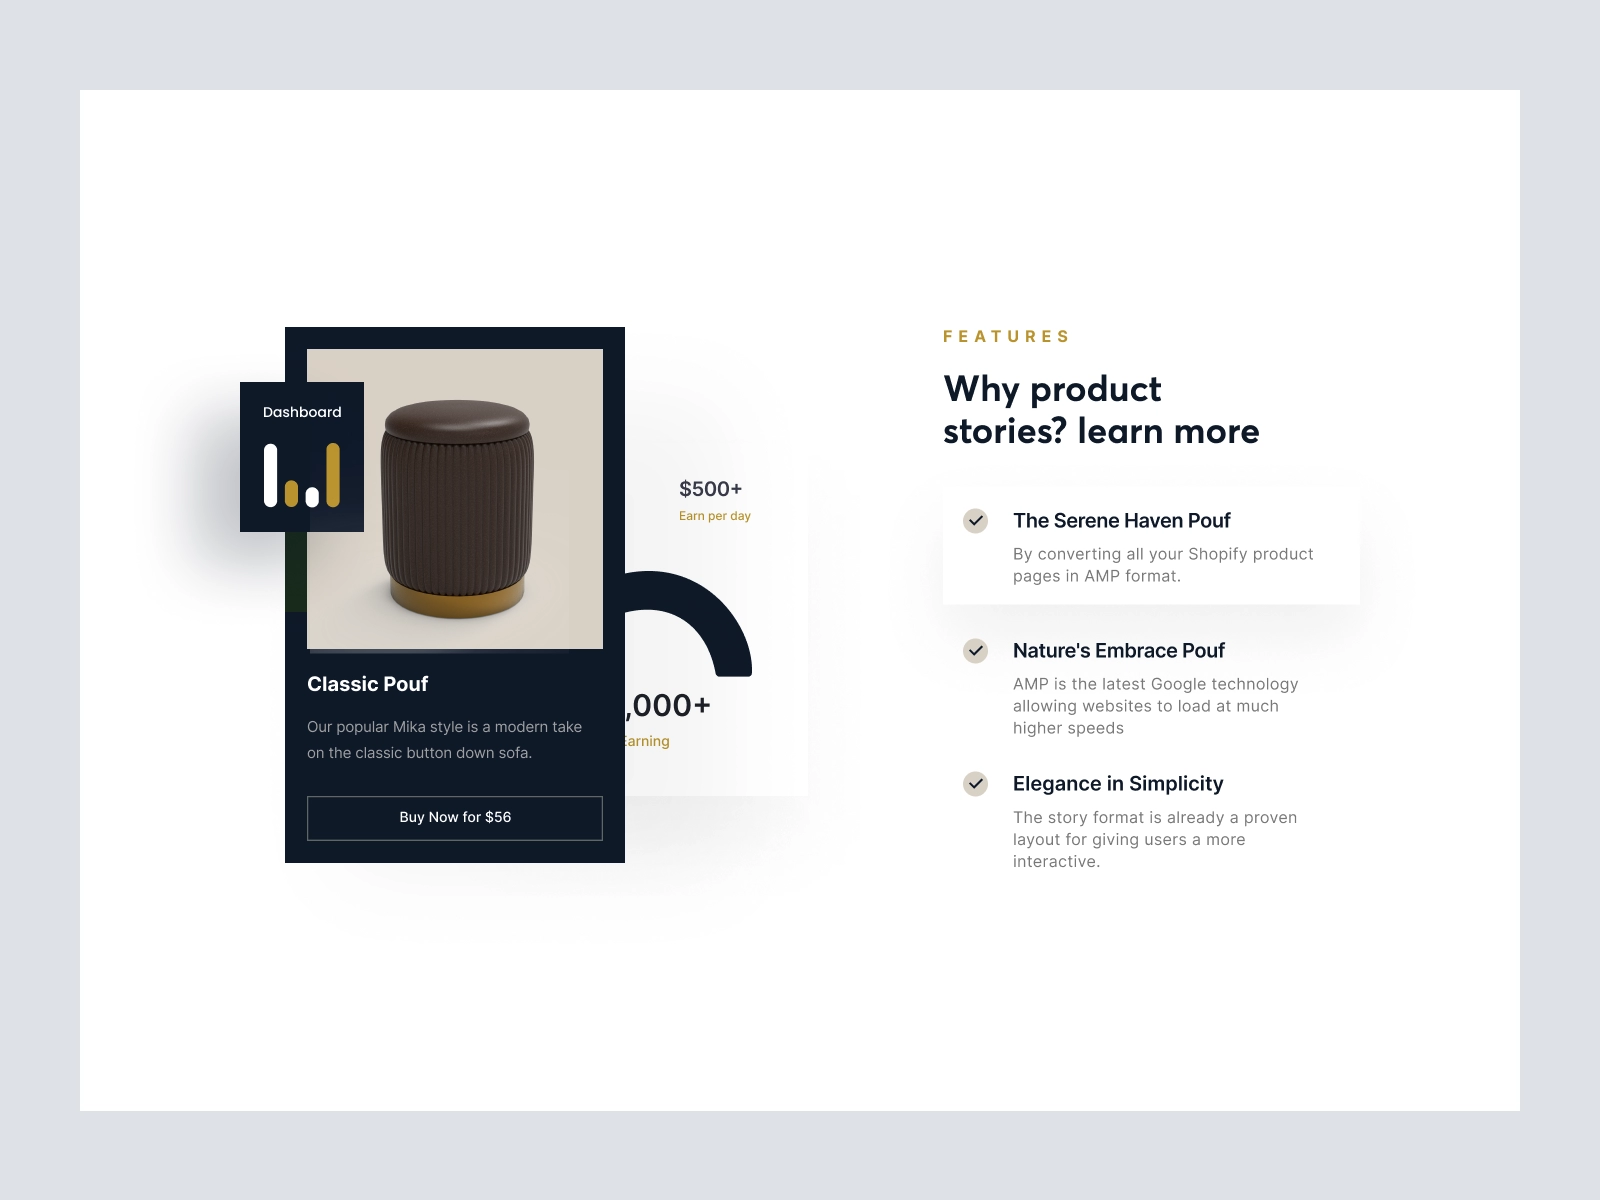 PuffNest - Shopify Store Design for Furniture Products for Adobe XD - screen 3